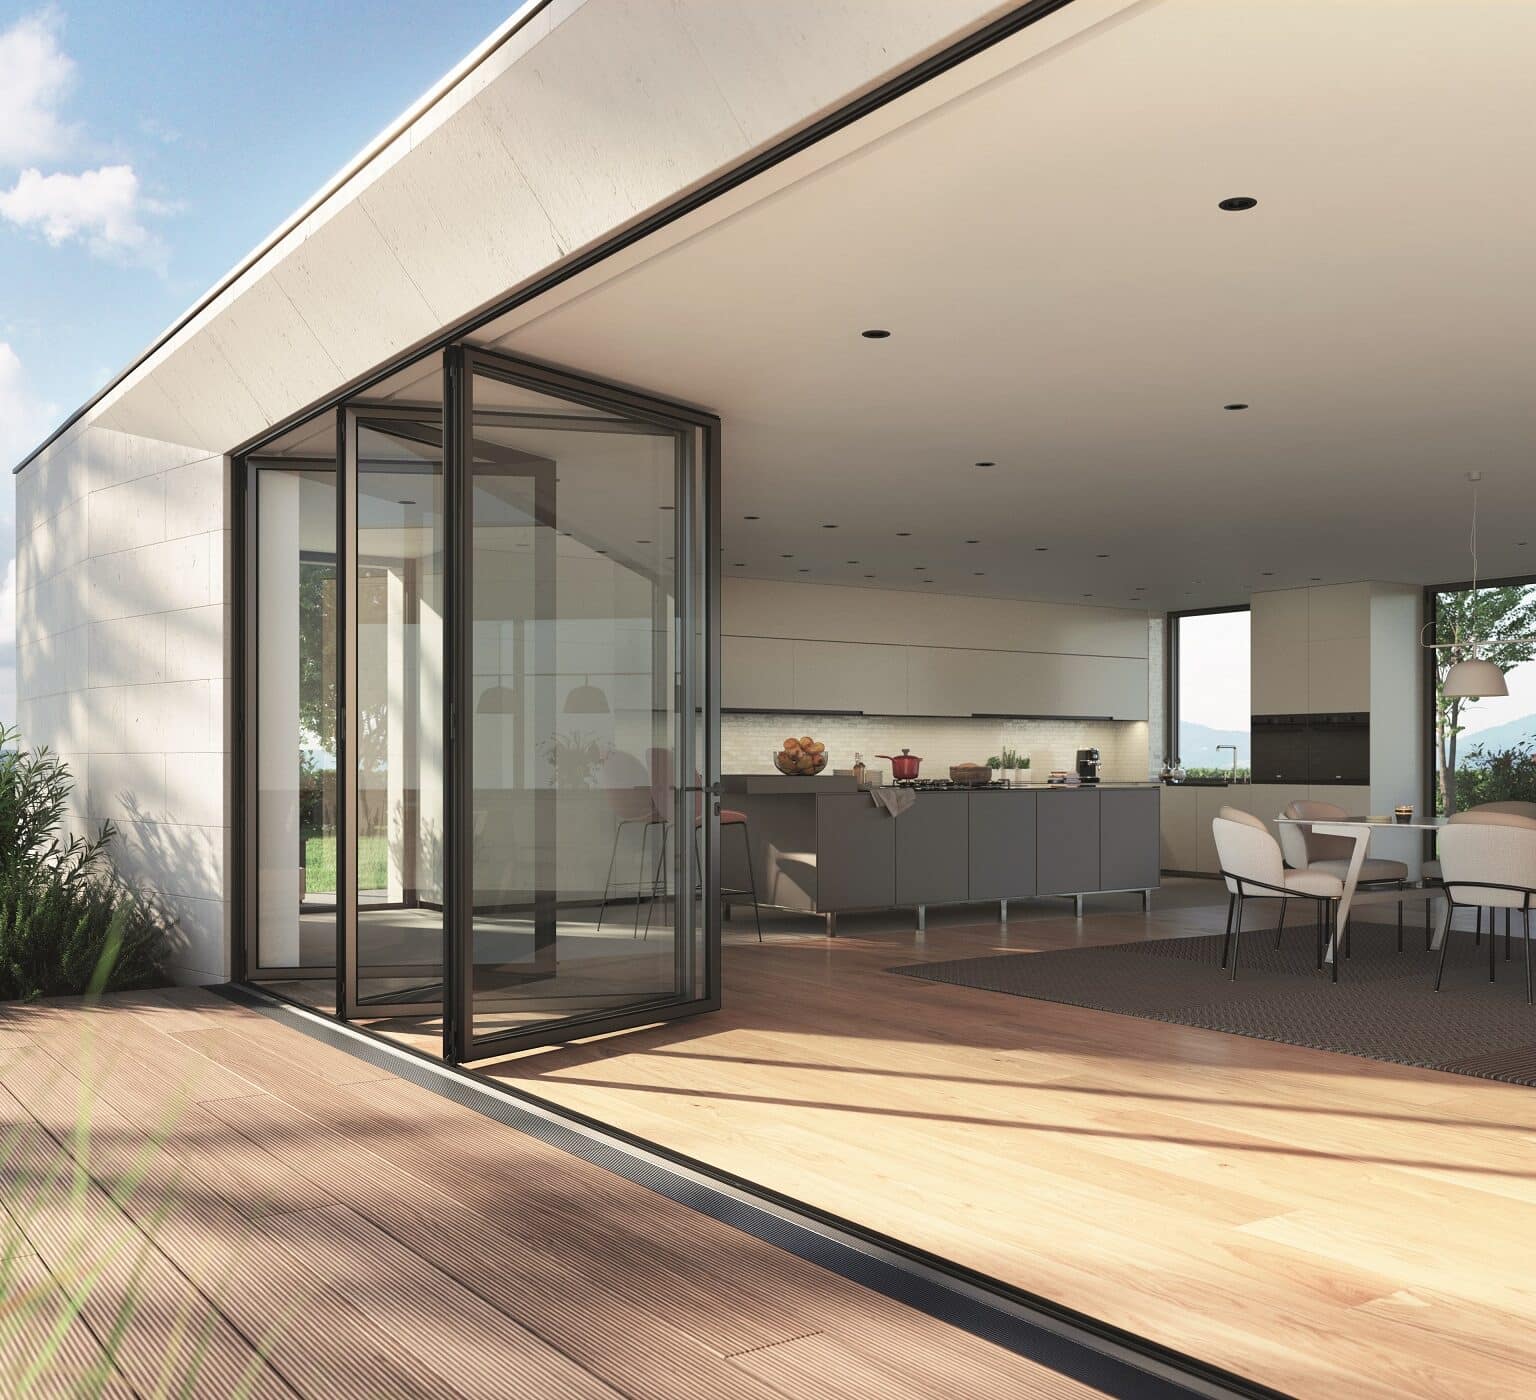 Schüco AS FD 75 bifold door partially folded in a new extension